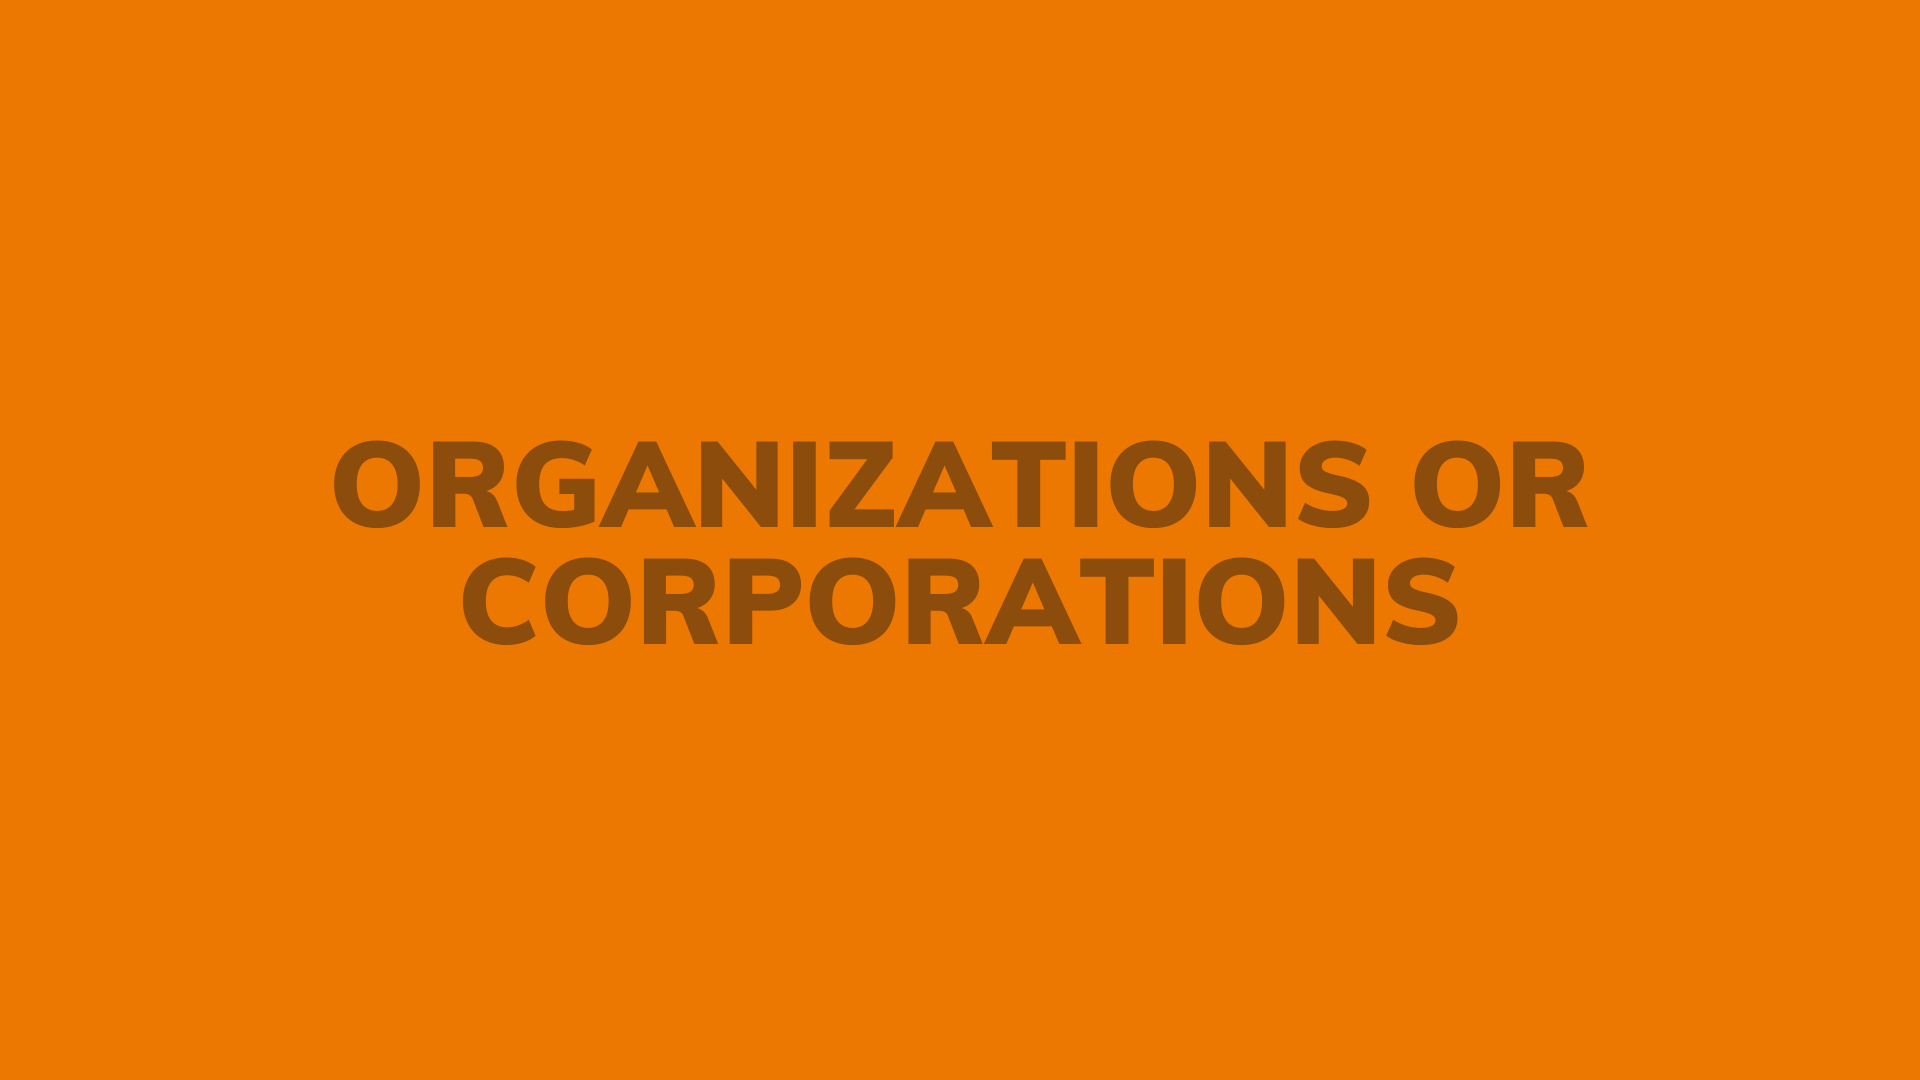 ORGS OR CORPORATIONS